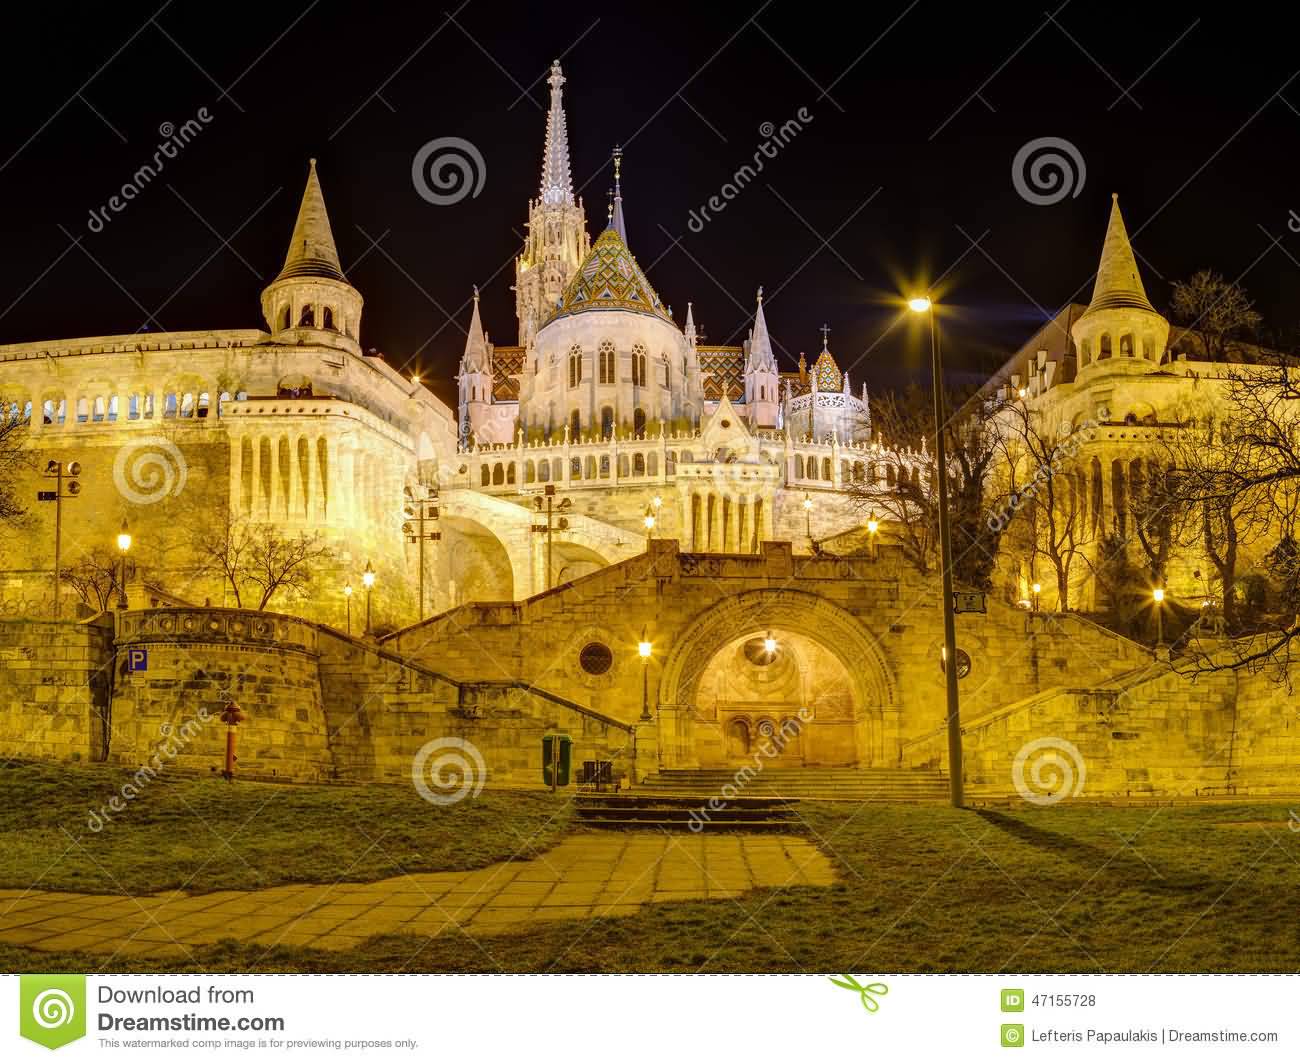 Fisherman’s Bastion And Matthias Church Night View In Budapest